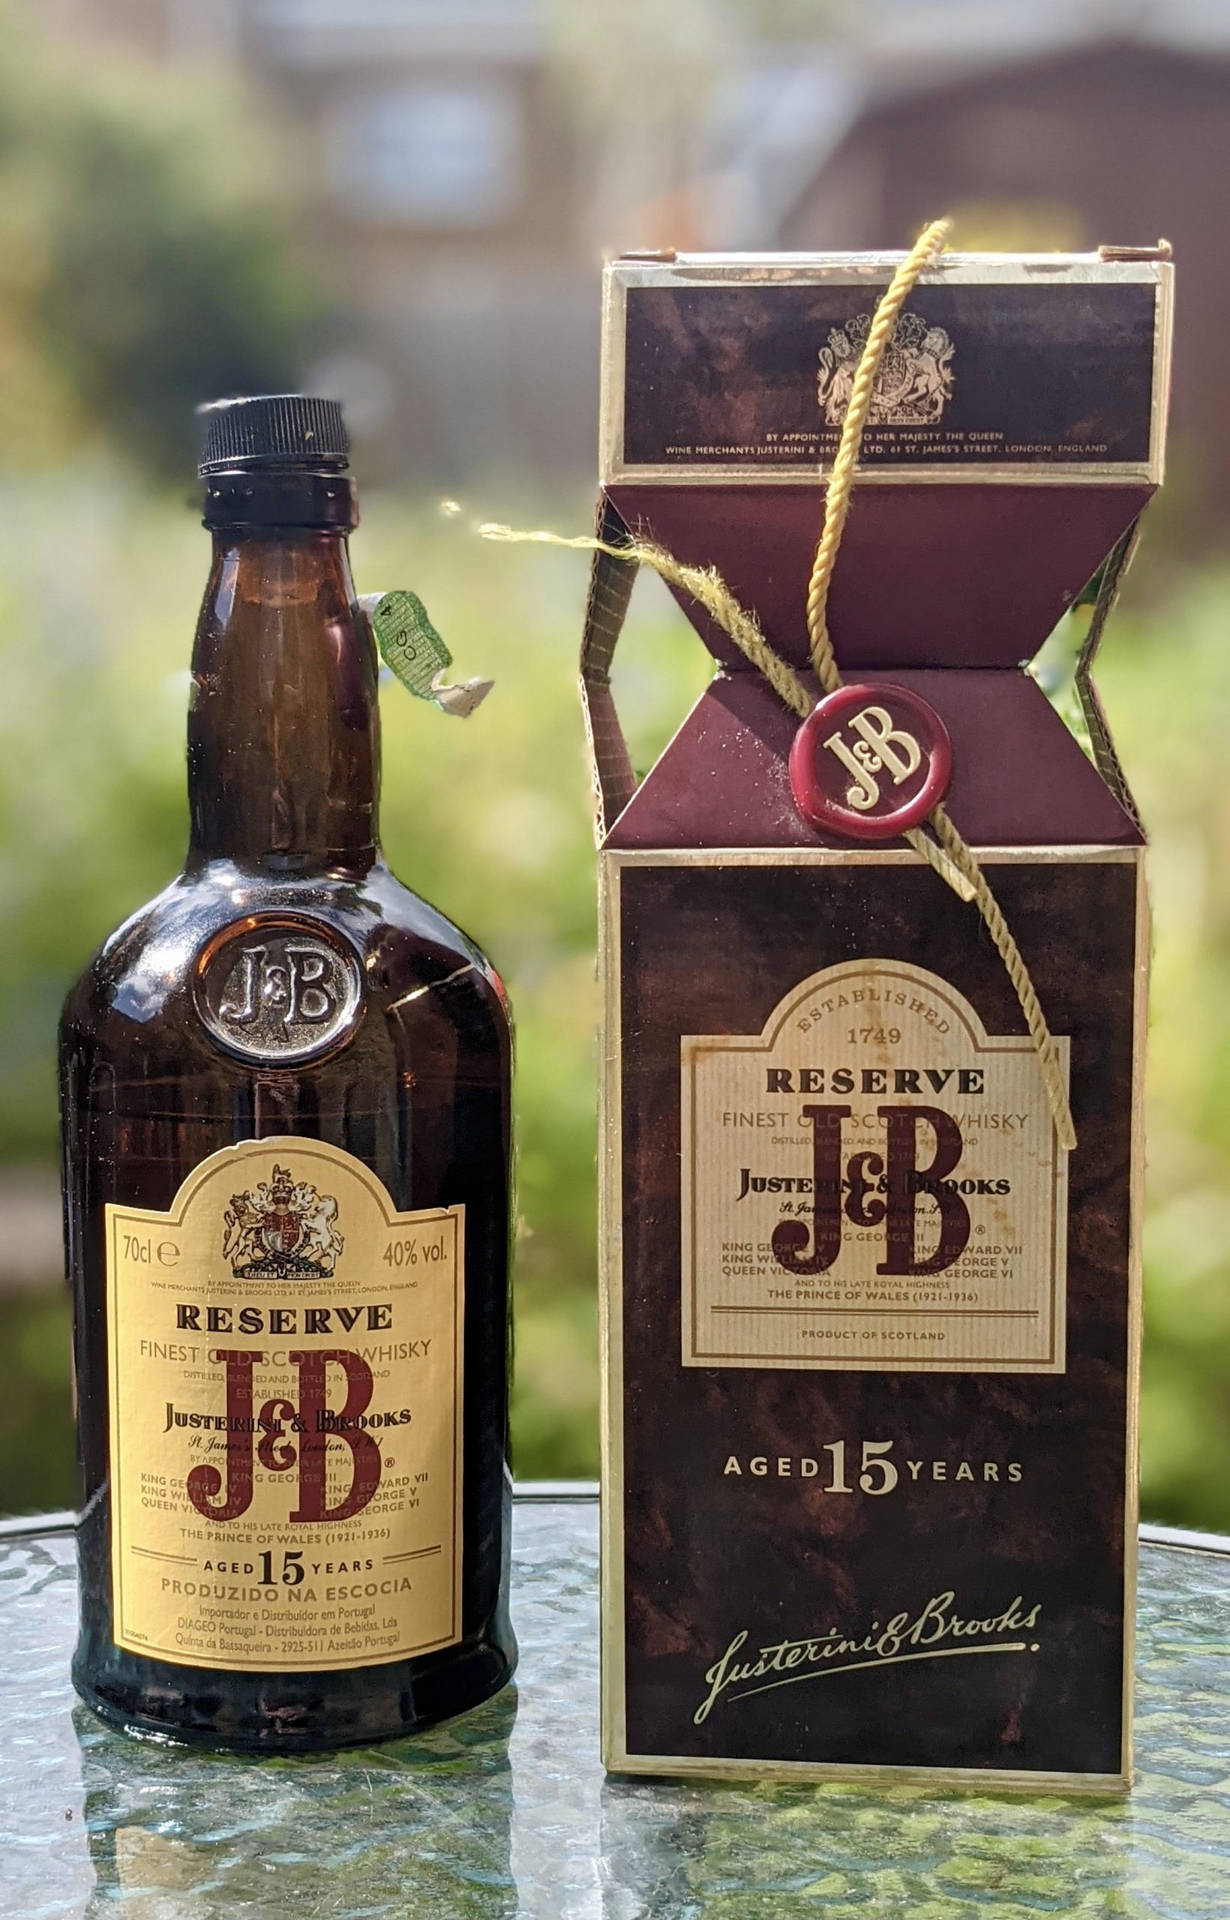 J&B Reserve Aged 15 Years Wallpaper